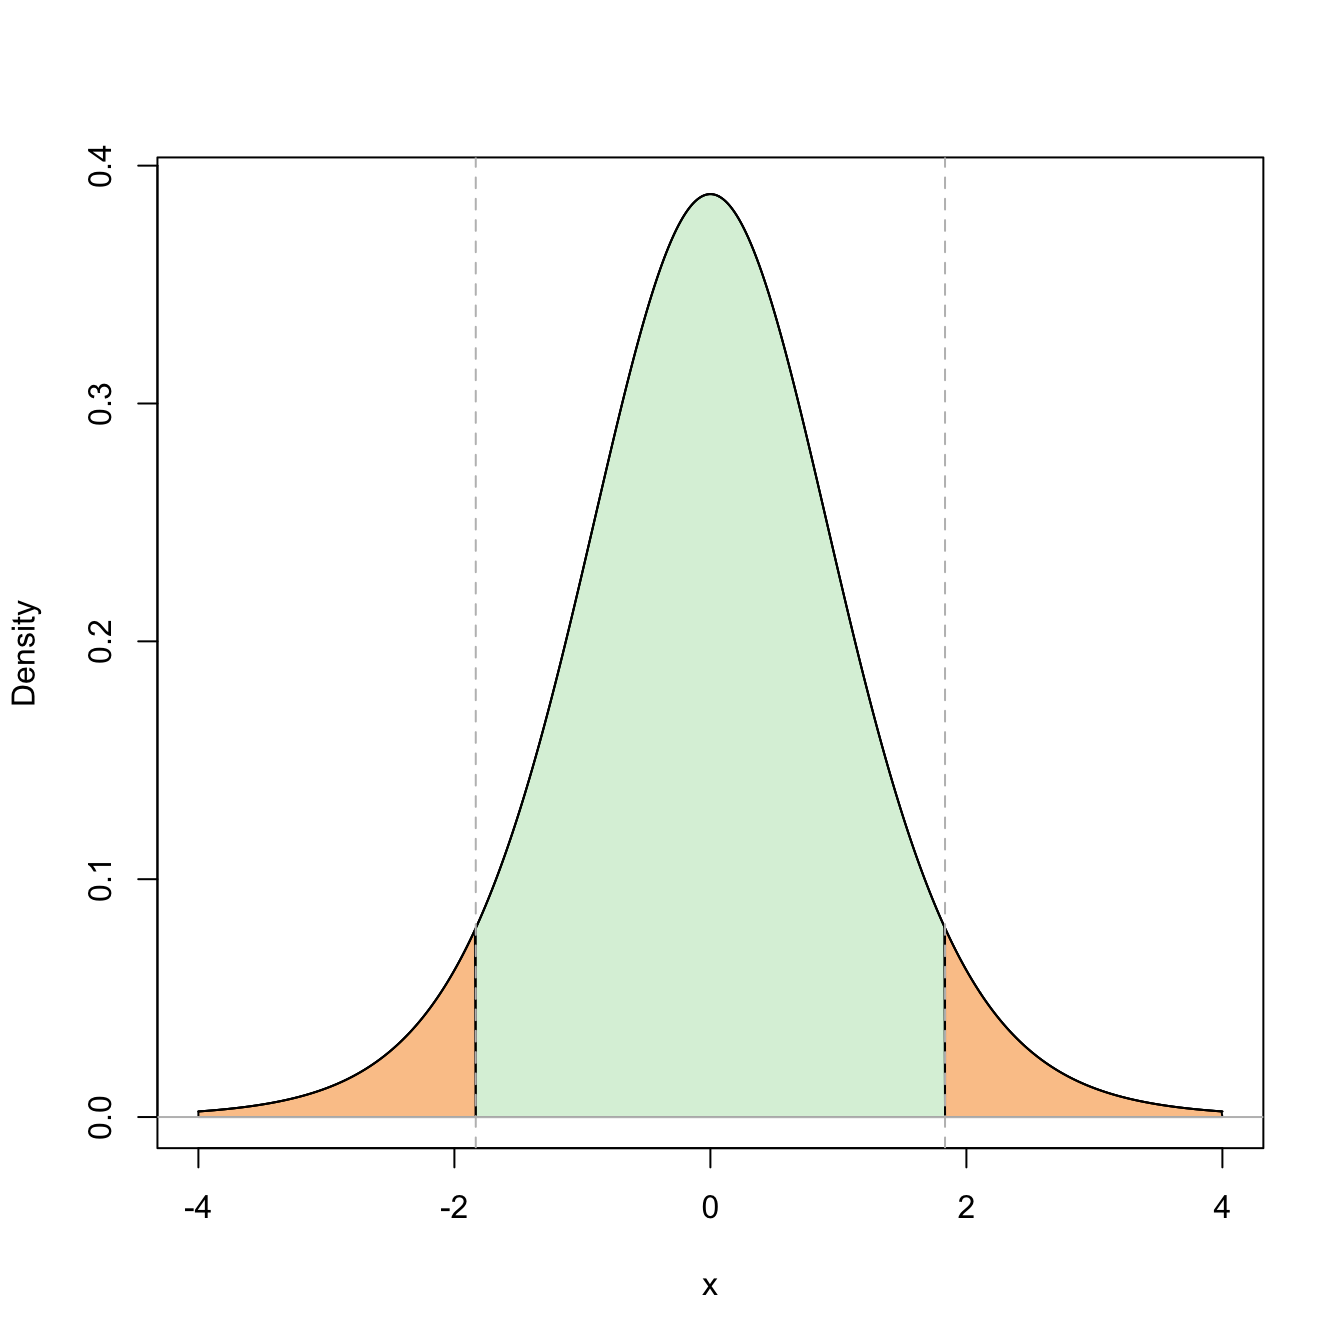 Representation of the probability \(\mathbb{P}(-t_{n-1;\alpha/2}\leq t_{n-1}\leq t_{n-1;\alpha/2})=1-\alpha\) (in green) and its complementary (in orange) for \(\alpha=0.10\) and \(n=10\).